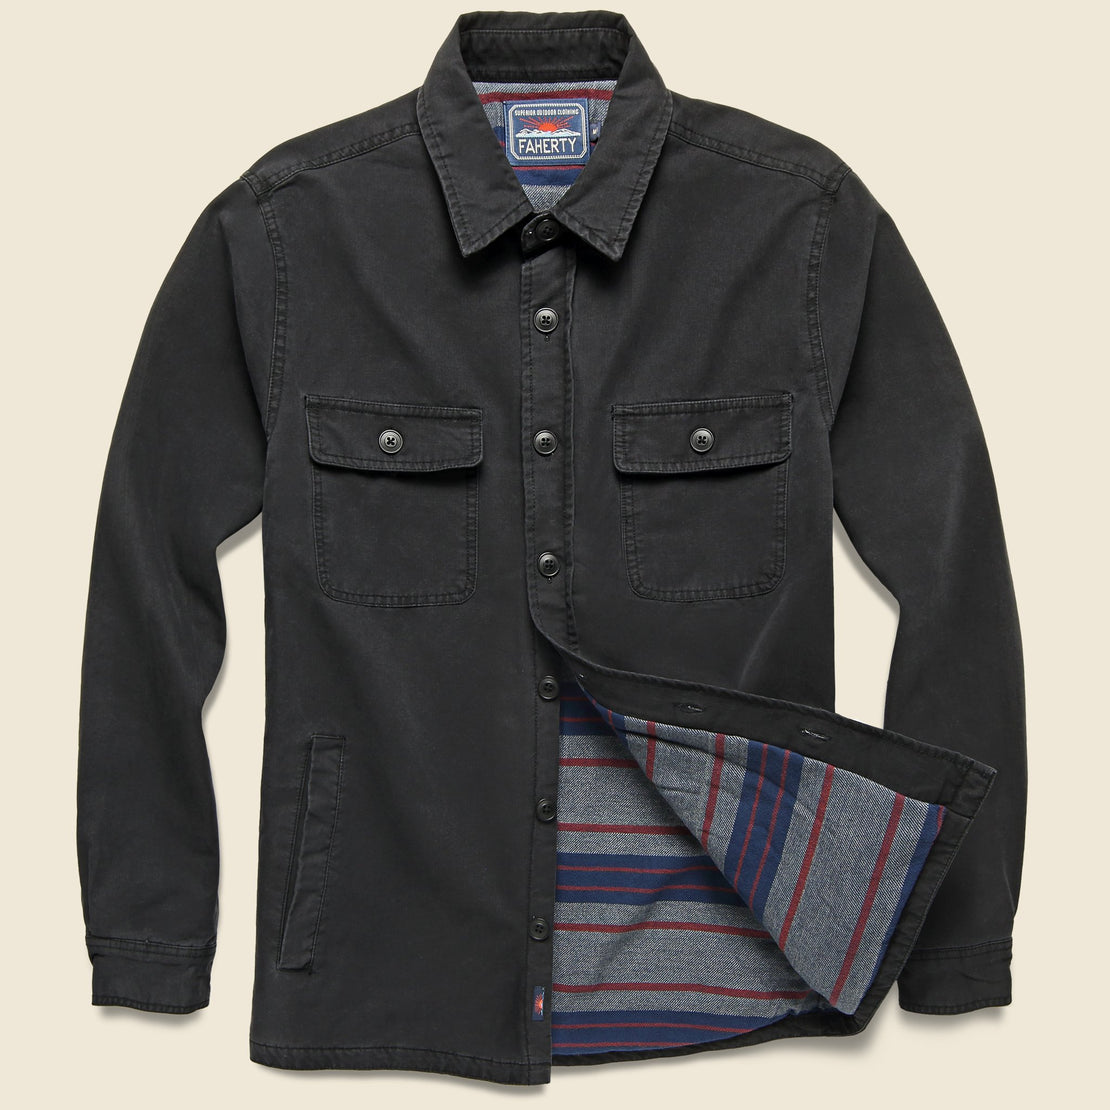 Faherty Stretch Blanket Lined CPO Jacket - Washed Black